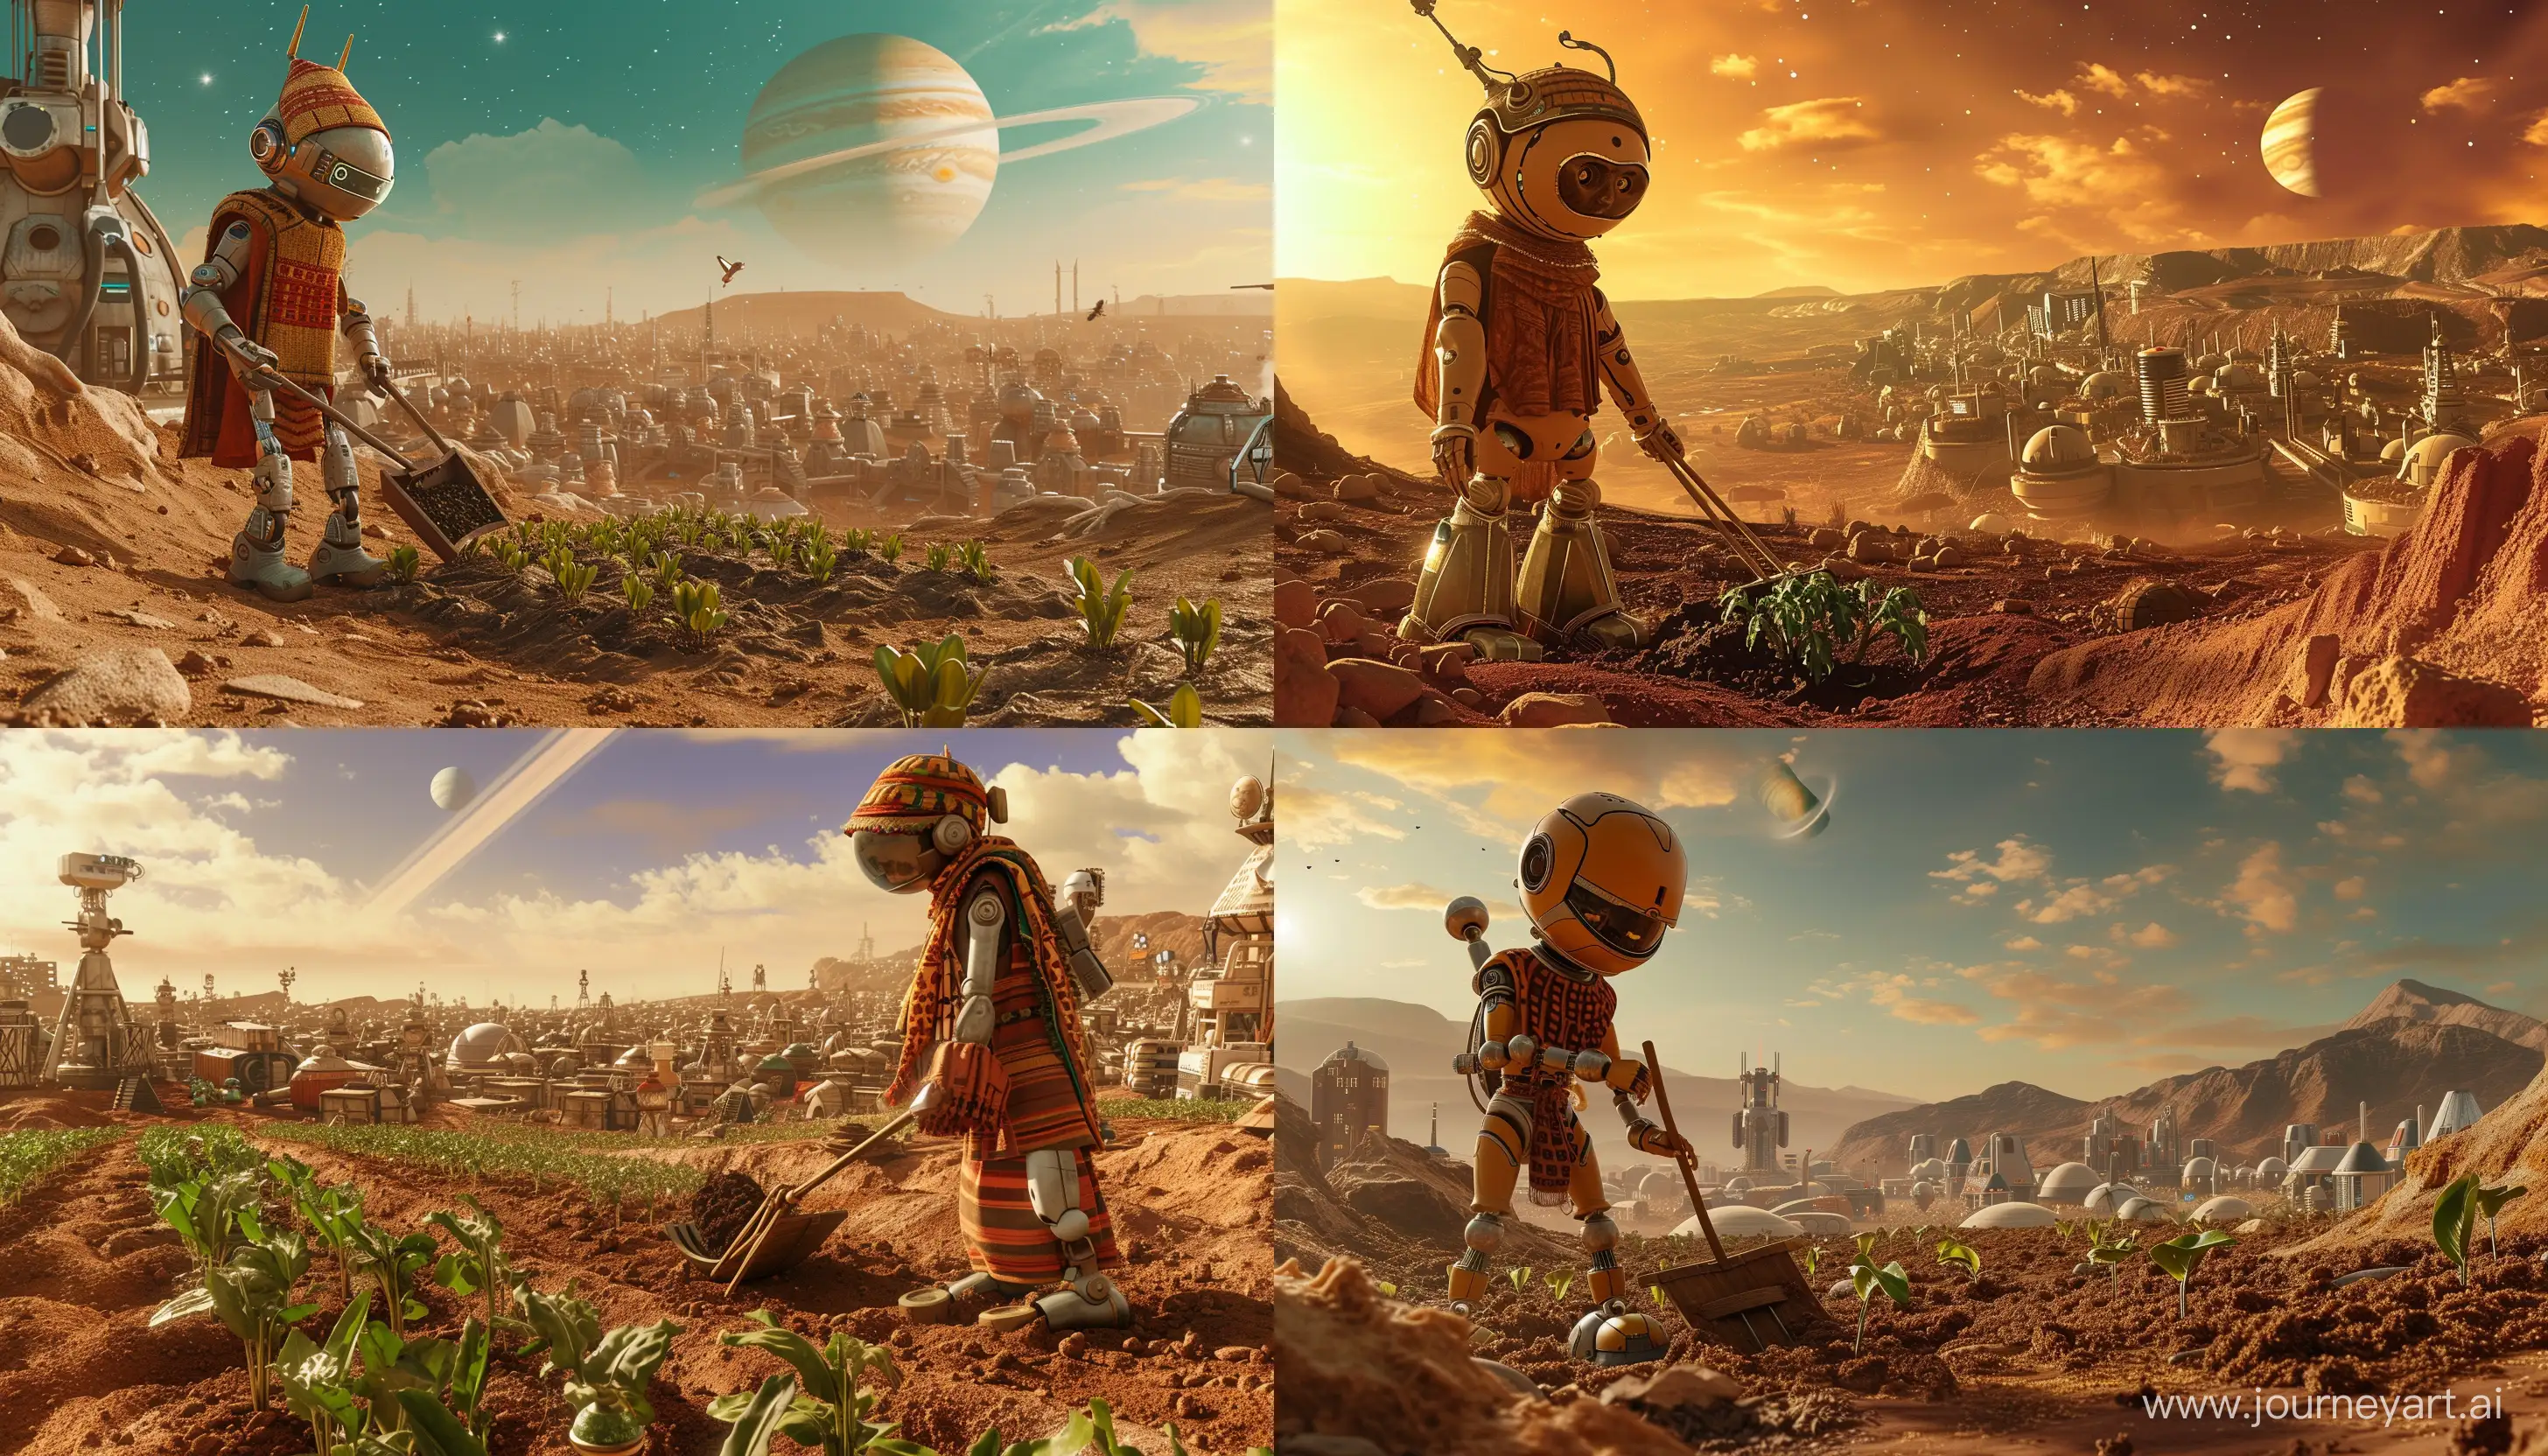 Futuristic-Martian-Cityscape-with-Jupiter-Rebel-Moon-Robot-Jimmy-Farming-and-Traditional-Attire